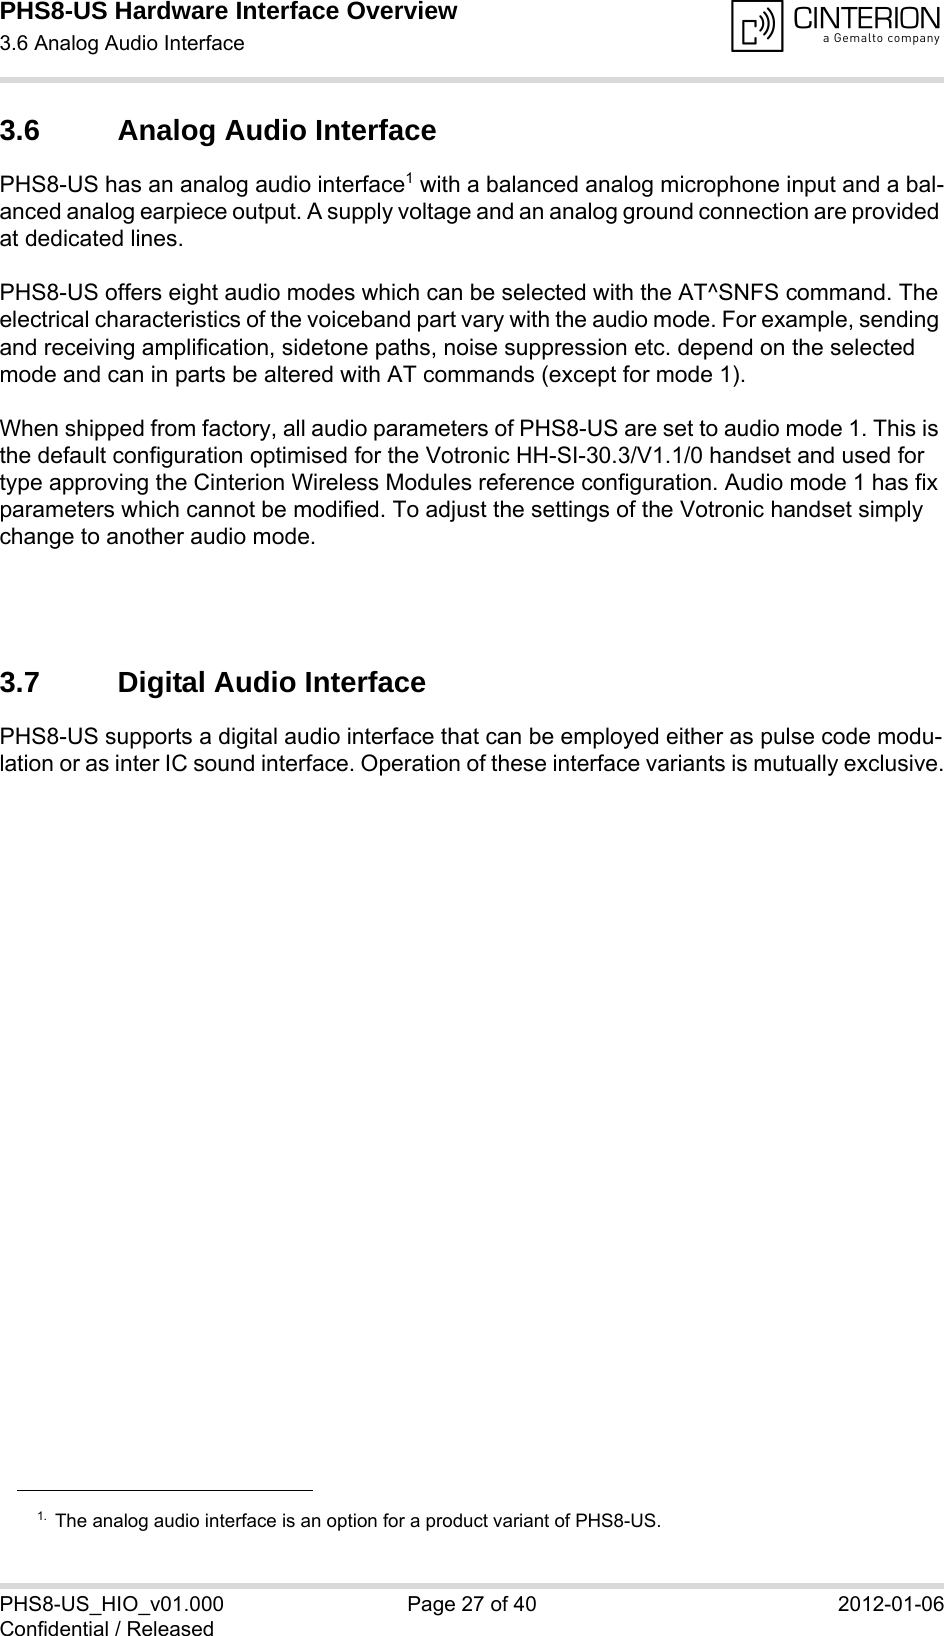 PHS8-US Hardware Interface Overview3.6 Analog Audio Interface28PHS8-US_HIO_v01.000 Page 27 of 40 2012-01-06Confidential / Released3.6 Analog Audio InterfacePHS8-US has an analog audio interface1 with a balanced analog microphone input and a bal-anced analog earpiece output. A supply voltage and an analog ground connection are provided at dedicated lines.PHS8-US offers eight audio modes which can be selected with the AT^SNFS command. The electrical characteristics of the voiceband part vary with the audio mode. For example, sending and receiving amplification, sidetone paths, noise suppression etc. depend on the selected mode and can in parts be altered with AT commands (except for mode 1).When shipped from factory, all audio parameters of PHS8-US are set to audio mode 1. This is the default configuration optimised for the Votronic HH-SI-30.3/V1.1/0 handset and used for type approving the Cinterion Wireless Modules reference configuration. Audio mode 1 has fix parameters which cannot be modified. To adjust the settings of the Votronic handset simply change to another audio mode.3.7 Digital Audio InterfacePHS8-US supports a digital audio interface that can be employed either as pulse code modu-lation or as inter IC sound interface. Operation of these interface variants is mutually exclusive.1. The analog audio interface is an option for a product variant of PHS8-US.